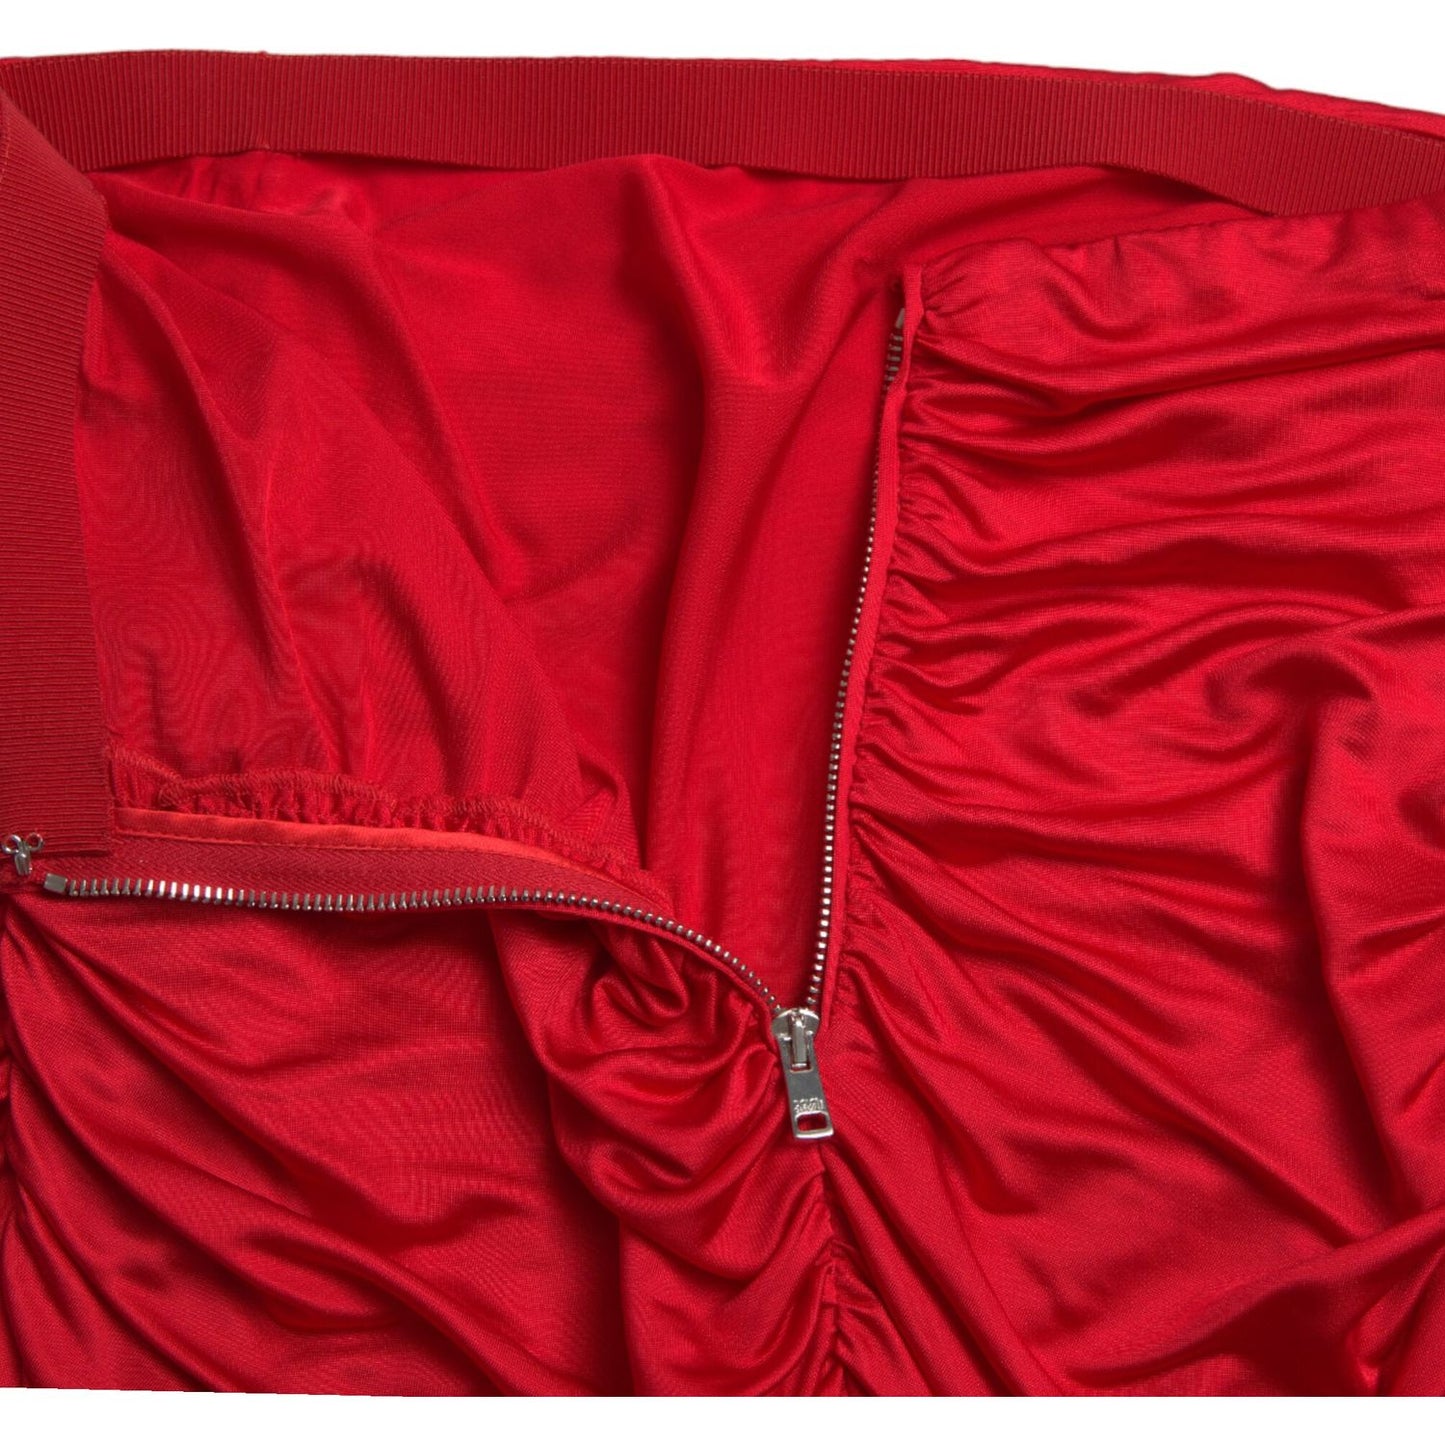 Dolce & Gabbana Elegant Pleated Mini Skirt in Vibrant Red red-viscose-high-waist-fitted-pleated-skirt